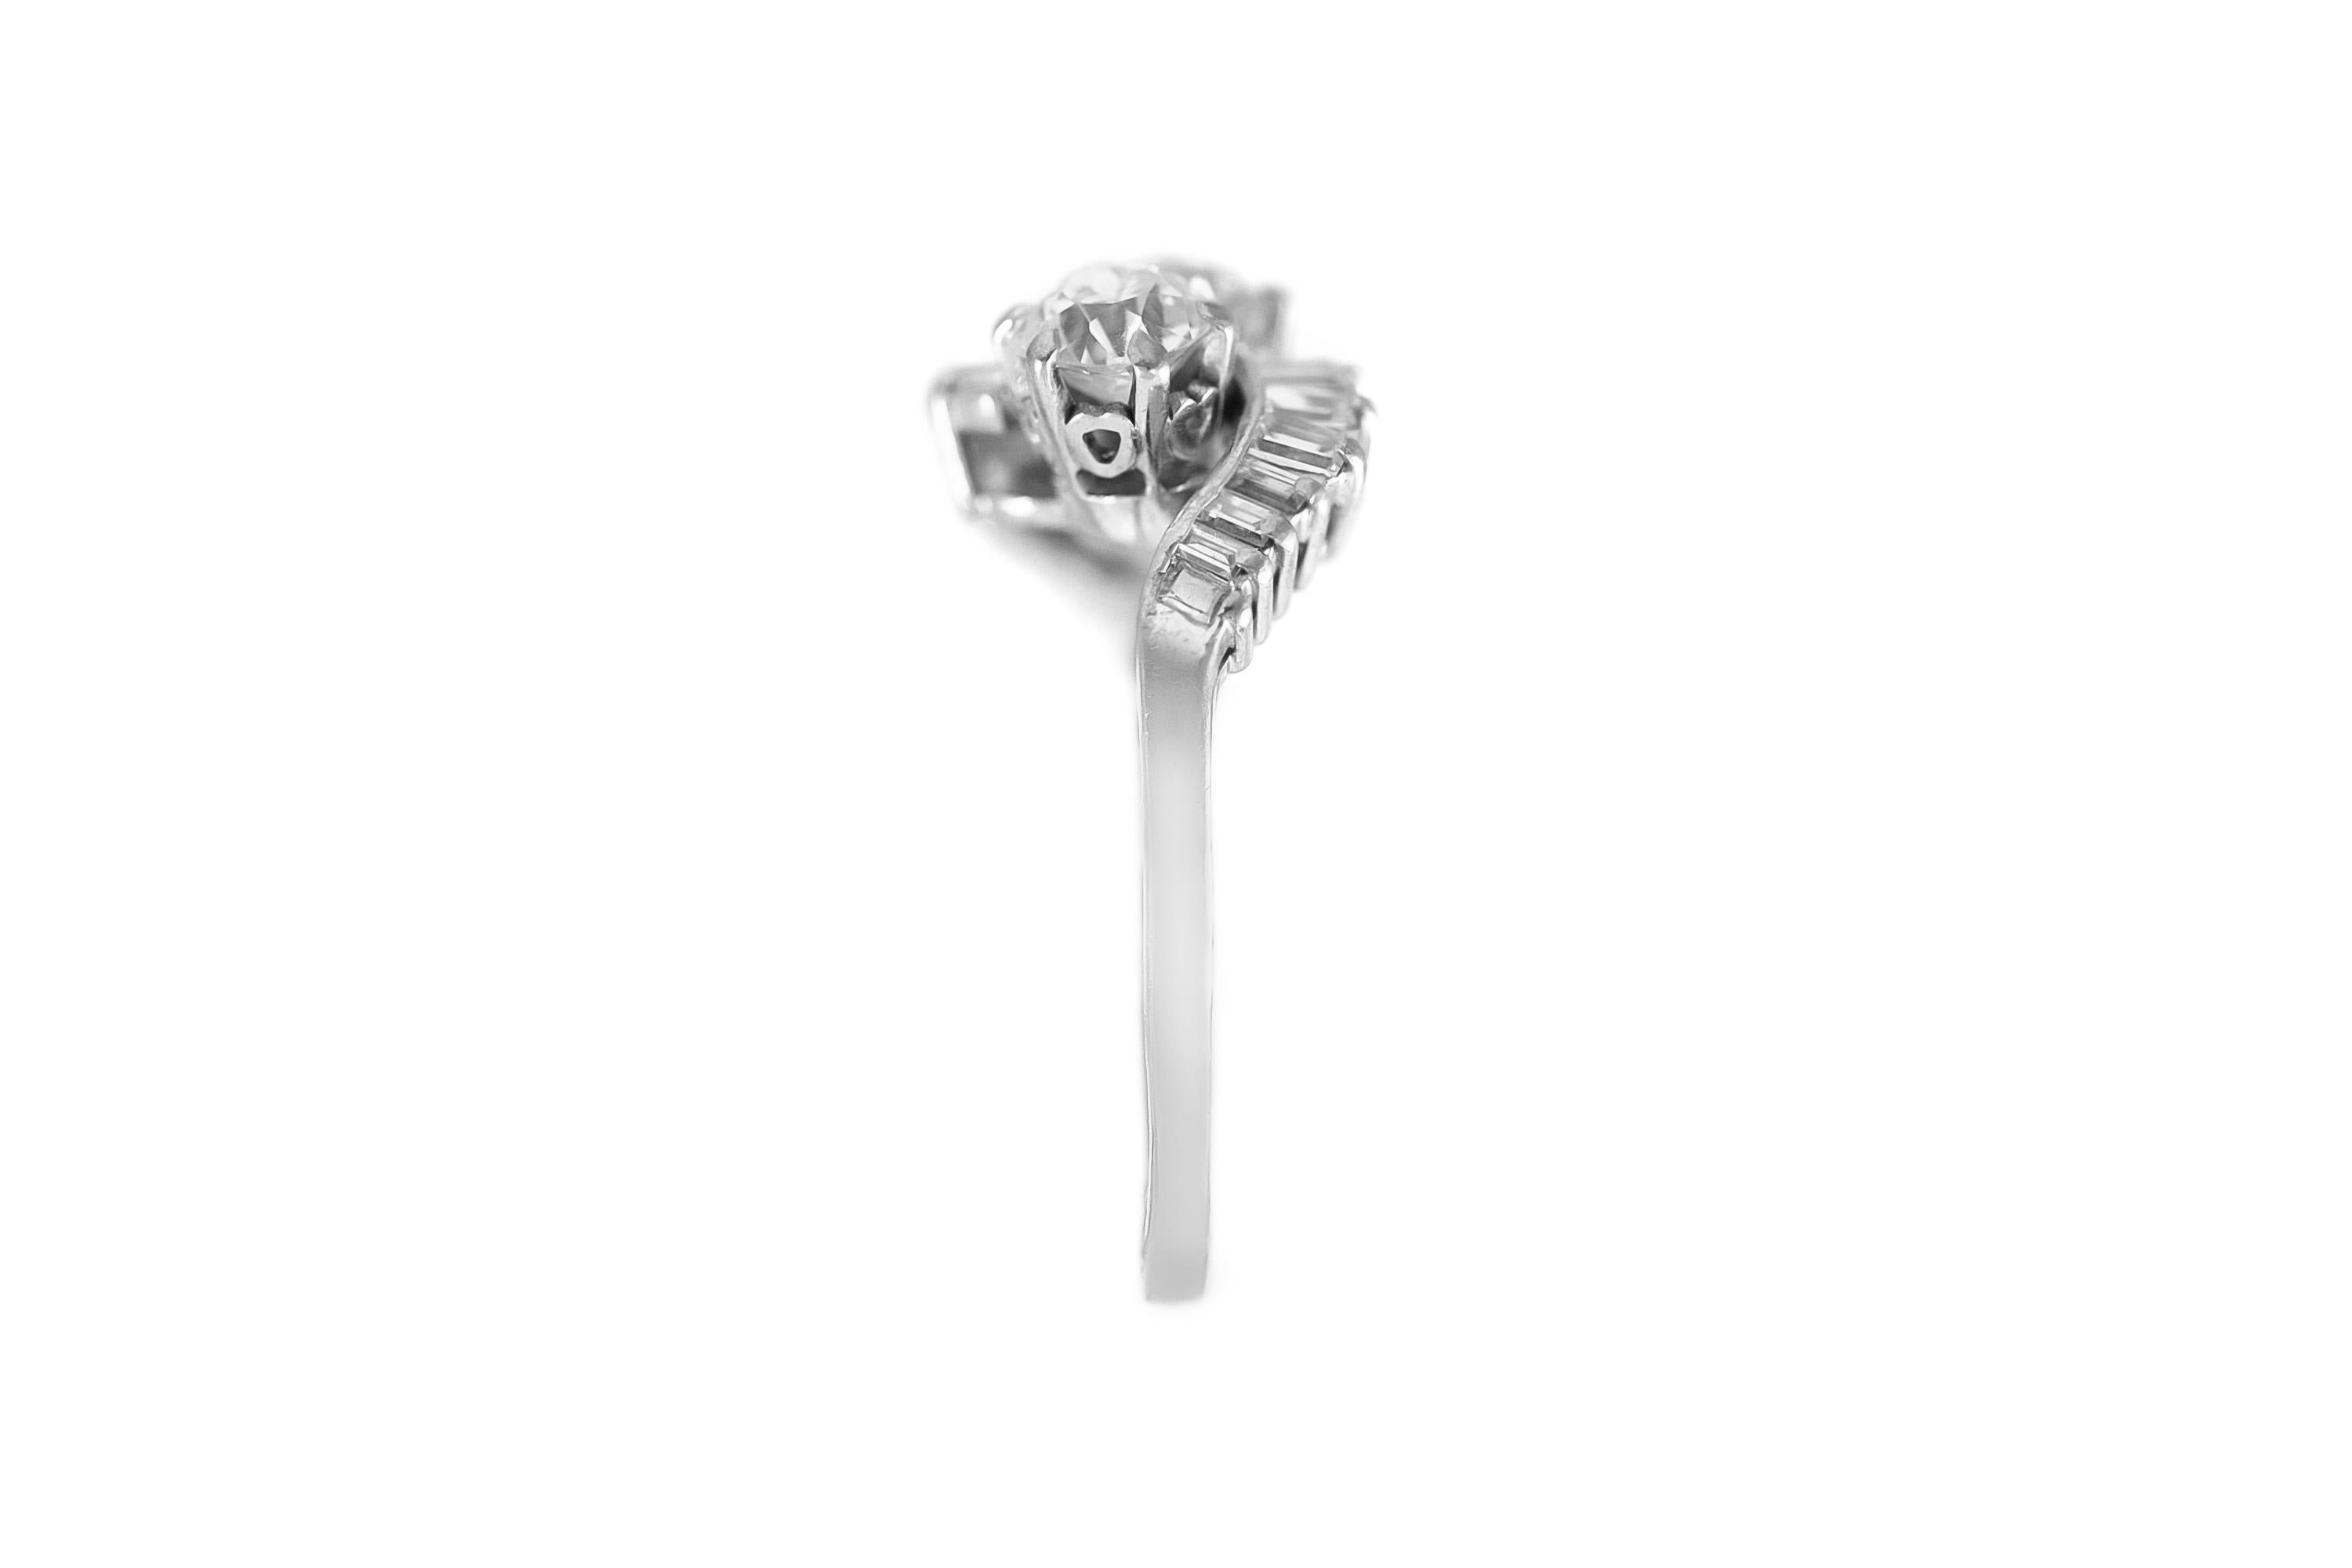 The ring is finely crafted in 18k white gold with two round diamonds weighing approximately total of 1.60 carat and emerald cut diamonds weighing approximately total of 0.80 carat.
Size 7.00 ( easy to resize )
Circa 1950.